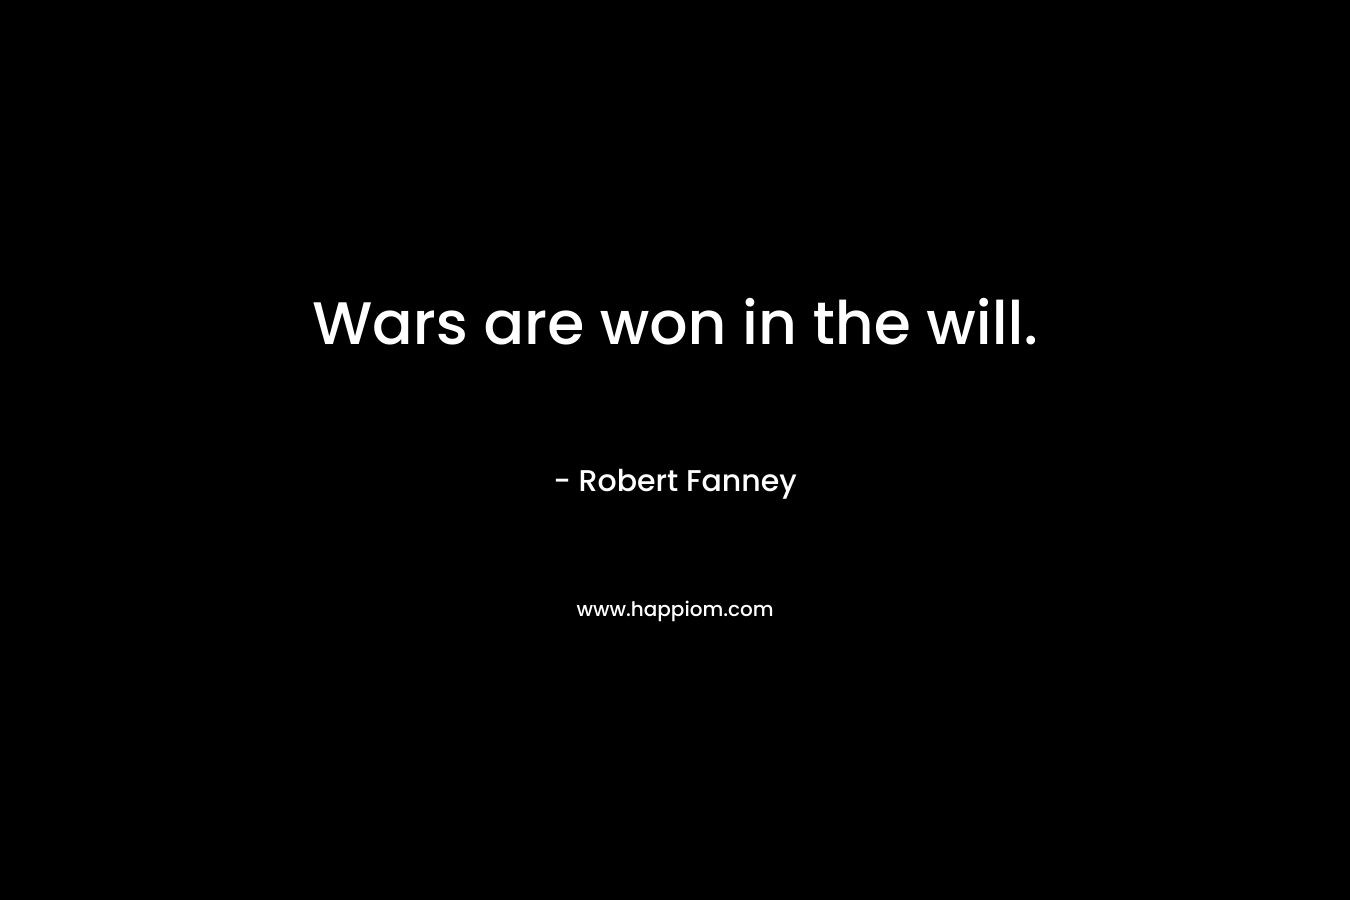 Wars are won in the will.